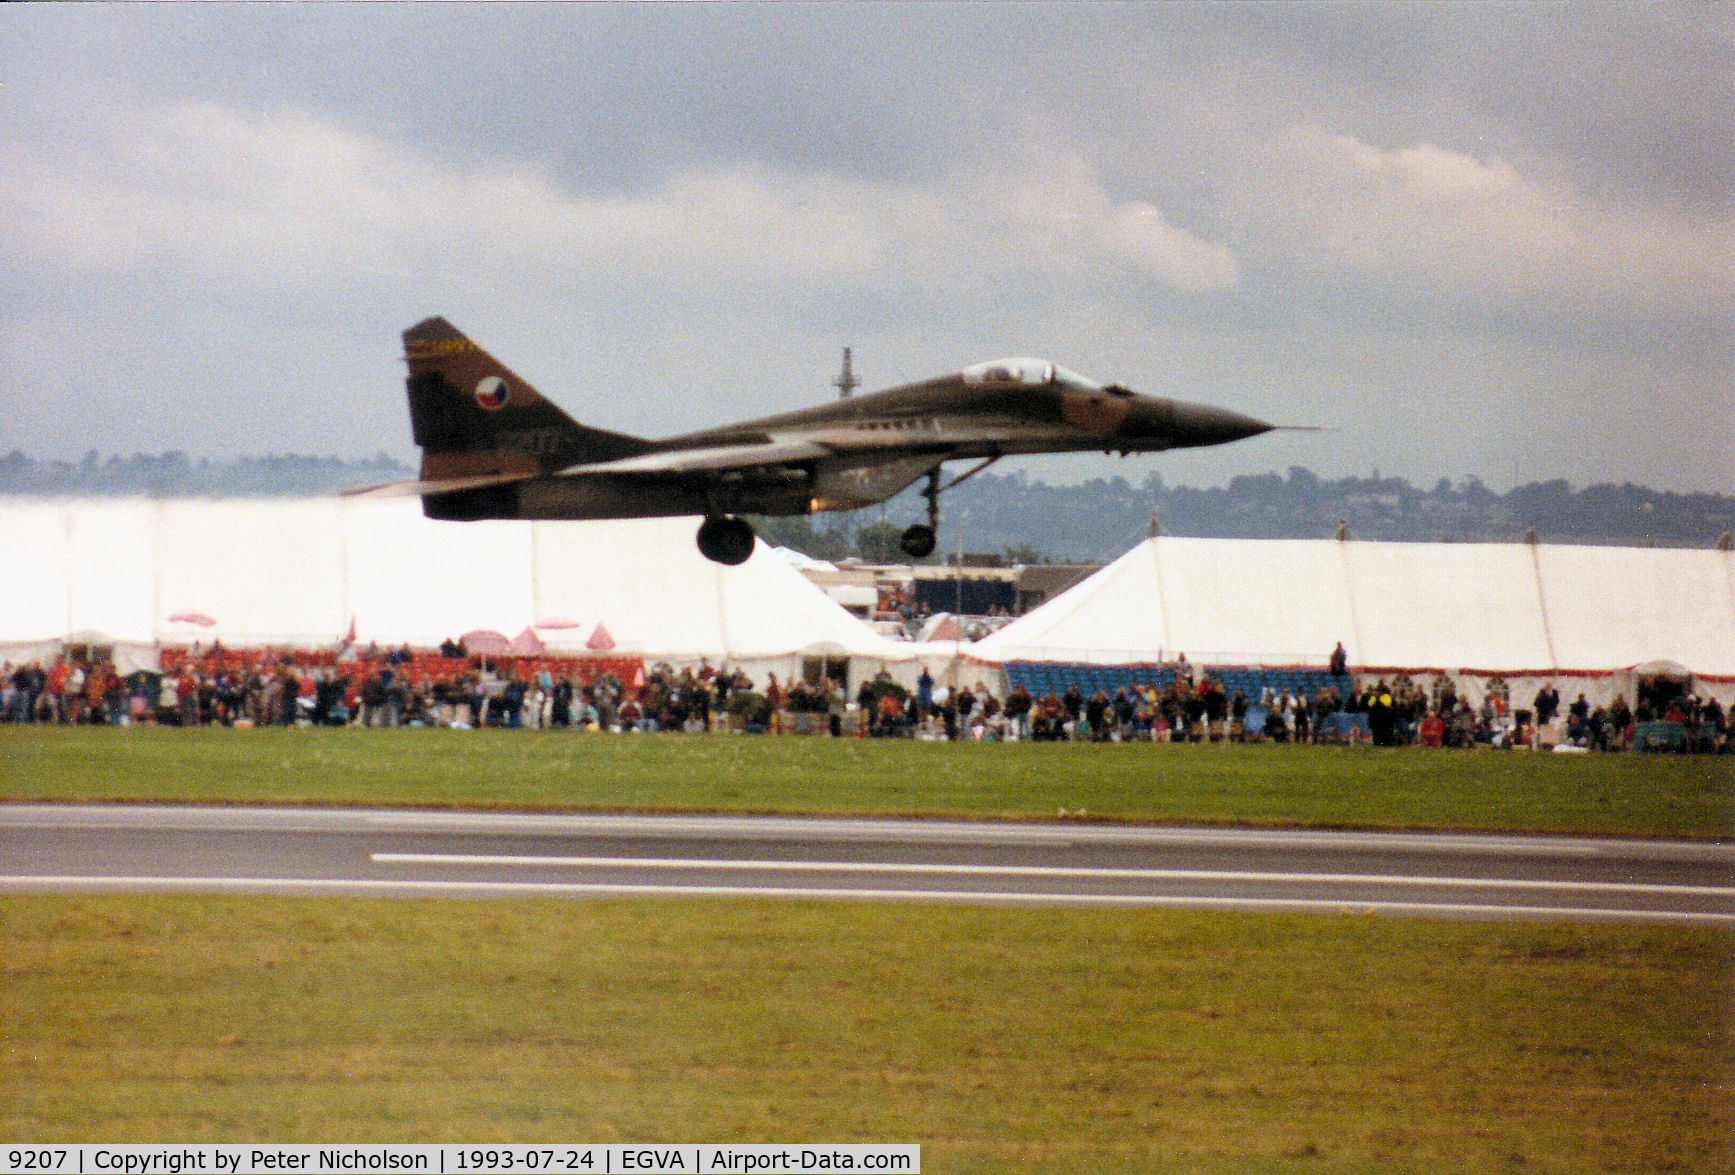 9207, Mikoyan-Gurevich MiG-29A C/N 26392, MiG-29A Fulcrum of 11 SLP Czech Air Force taking off at the 1993 Intnl Air Tattoo at RAF Fairford.